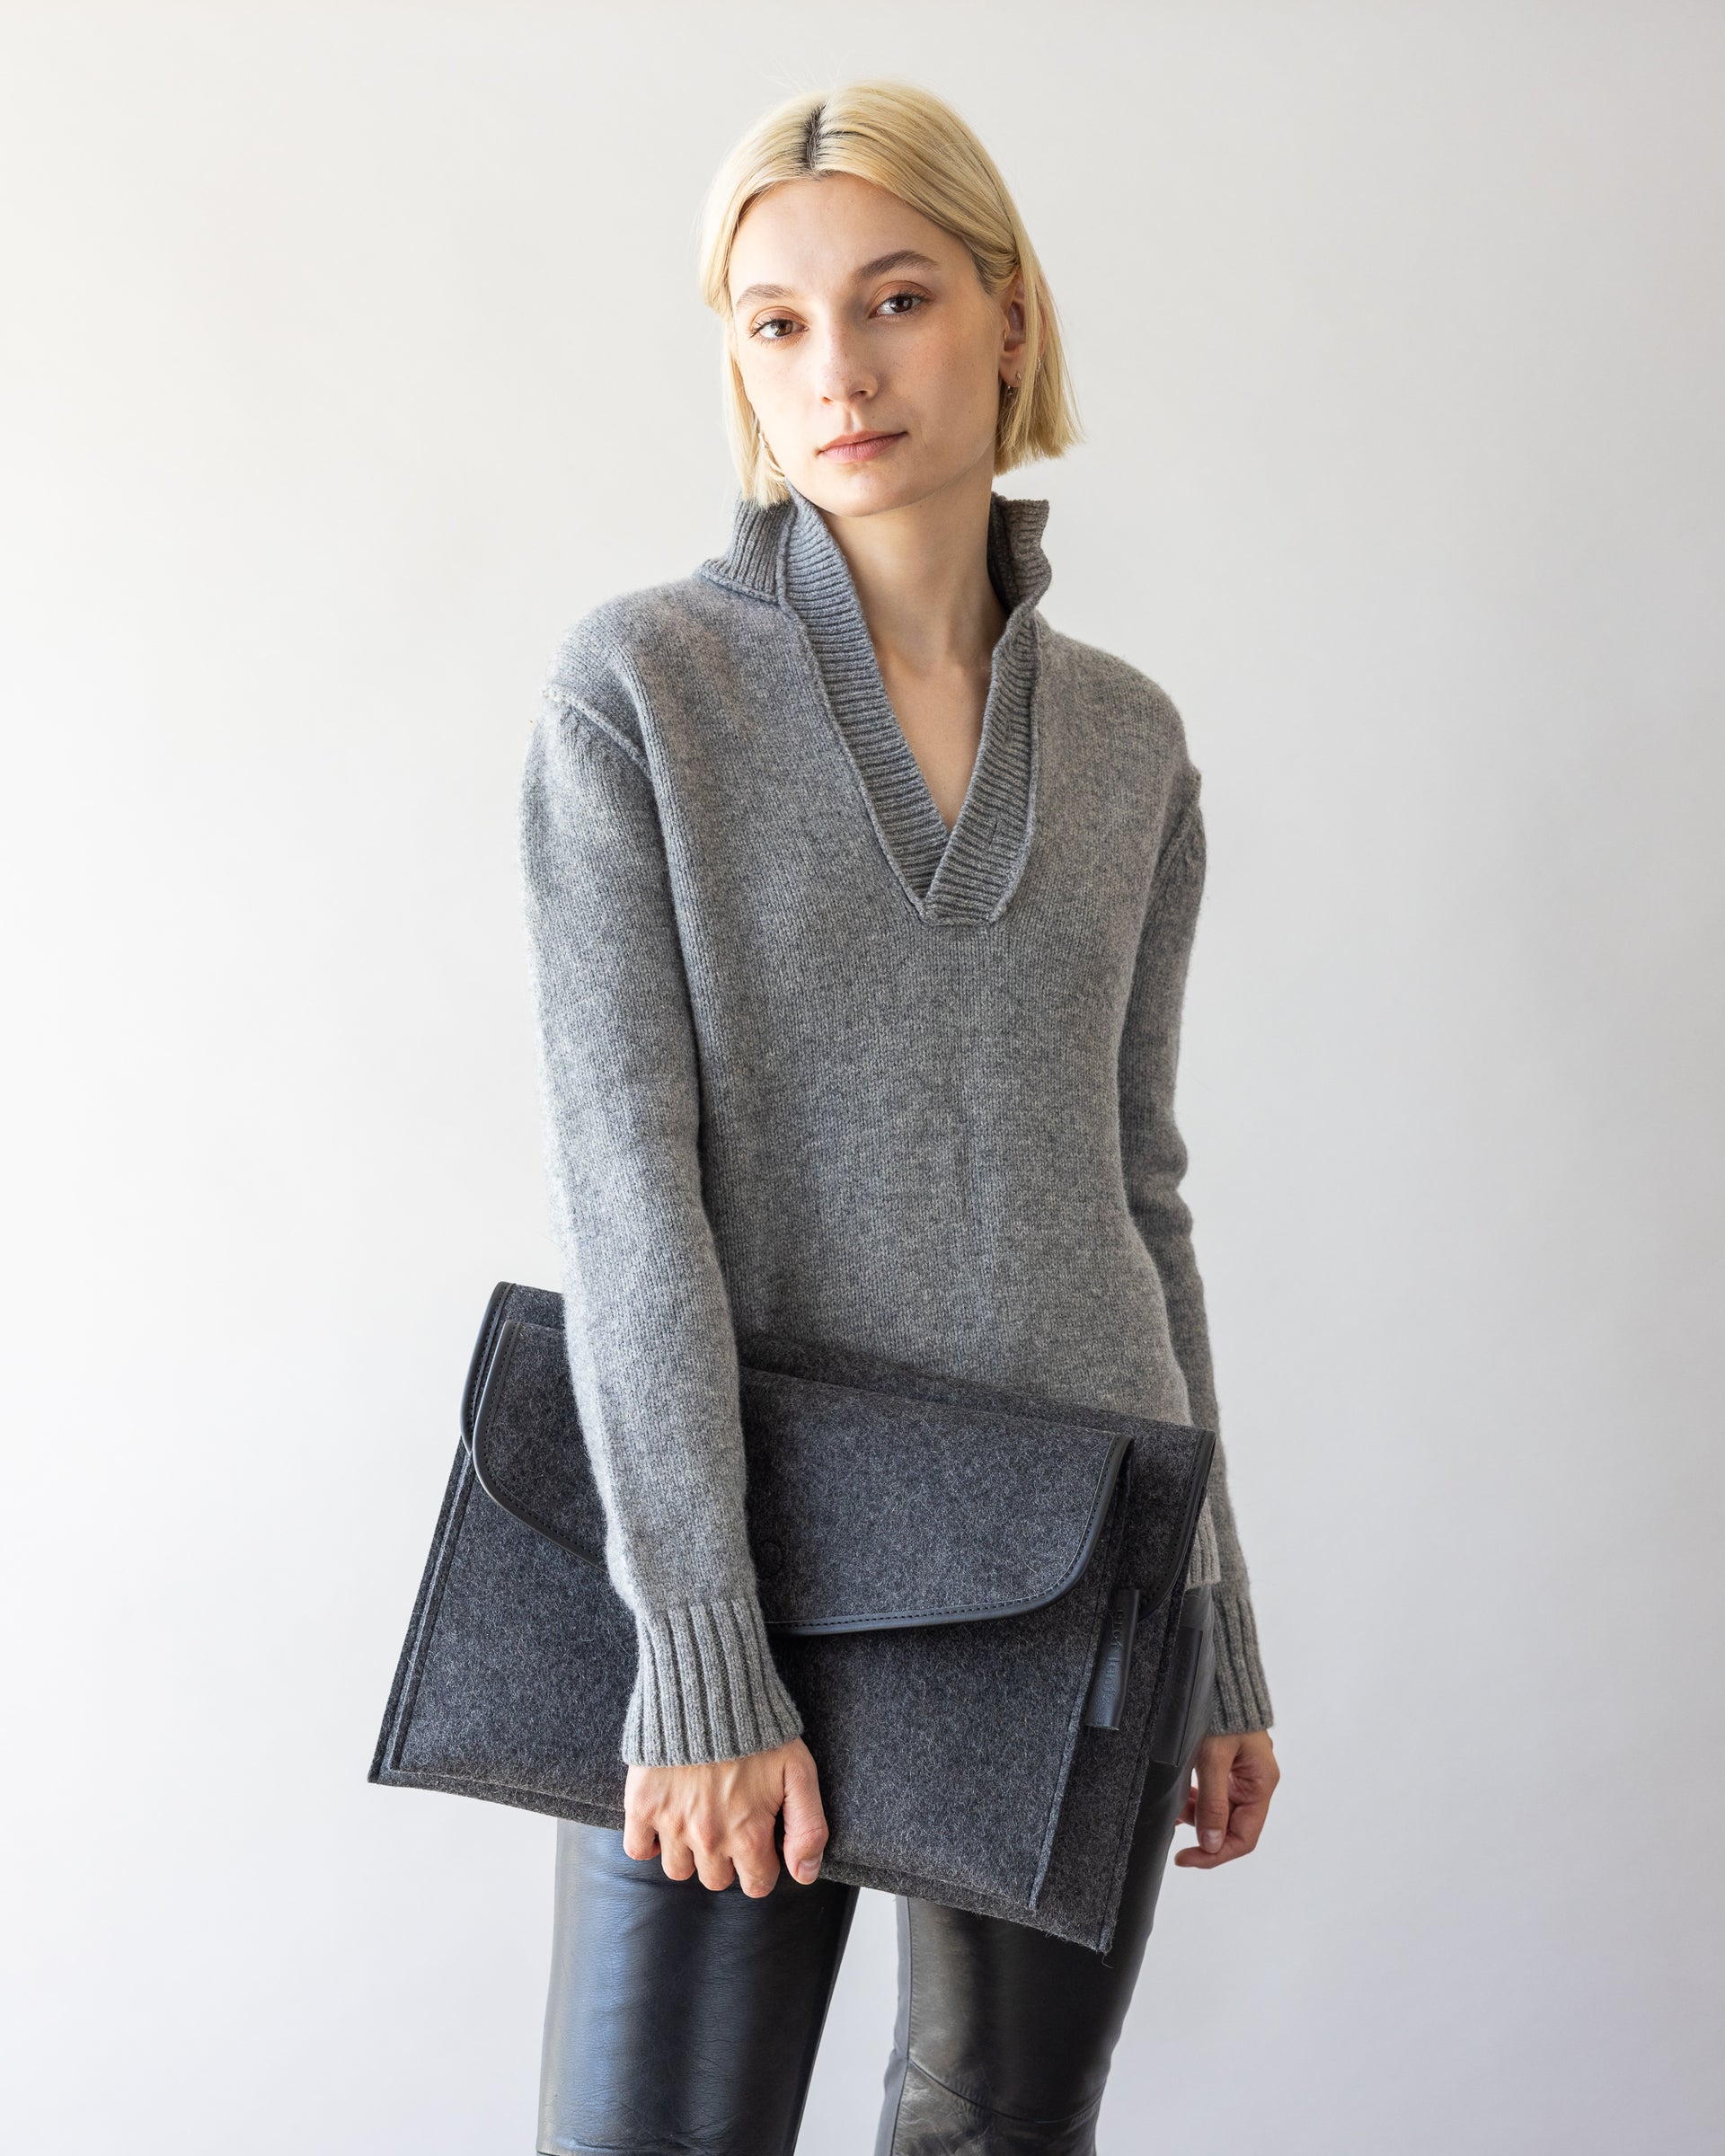 Envelope Merino Wool 14" and 16" Tech Sleeves both in charcoal held by a stylish woman in one hand by her side